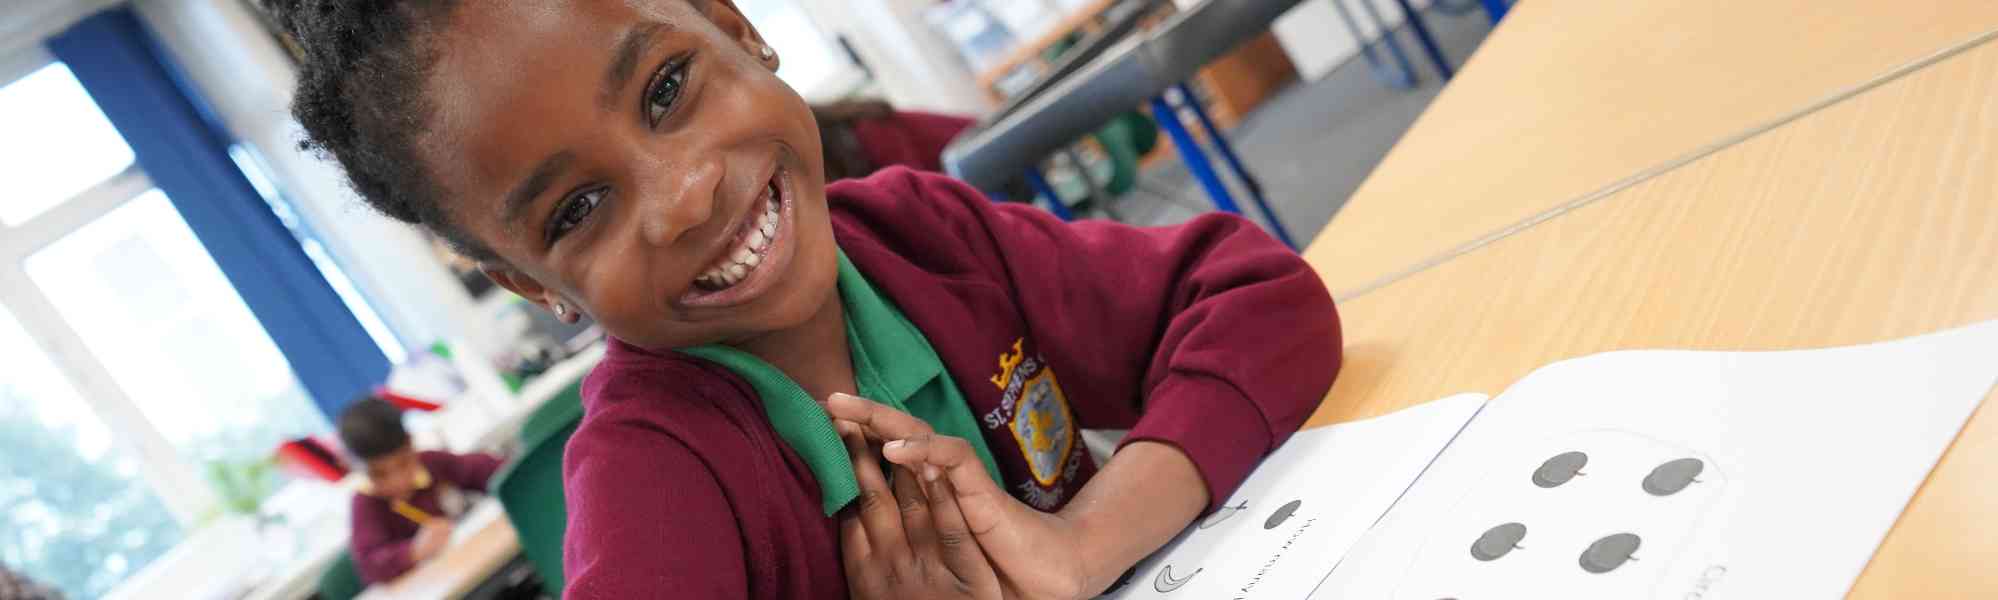 Maths at St Stephen's CE Primary School